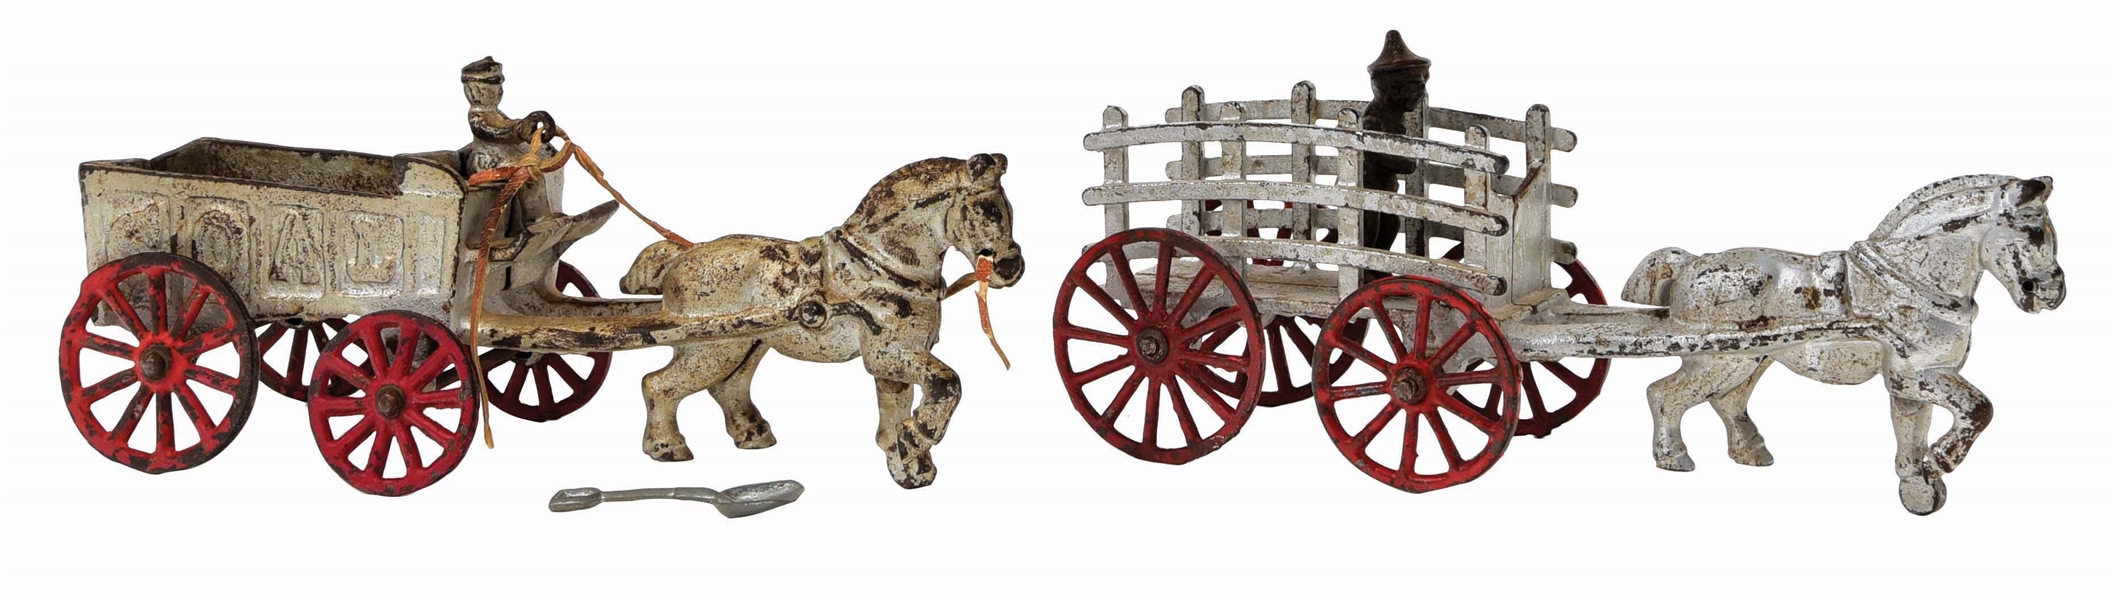 LOT OF 2: AMERICAN MADE CAST-IRON HORSE-DRAWN CART TOYS.